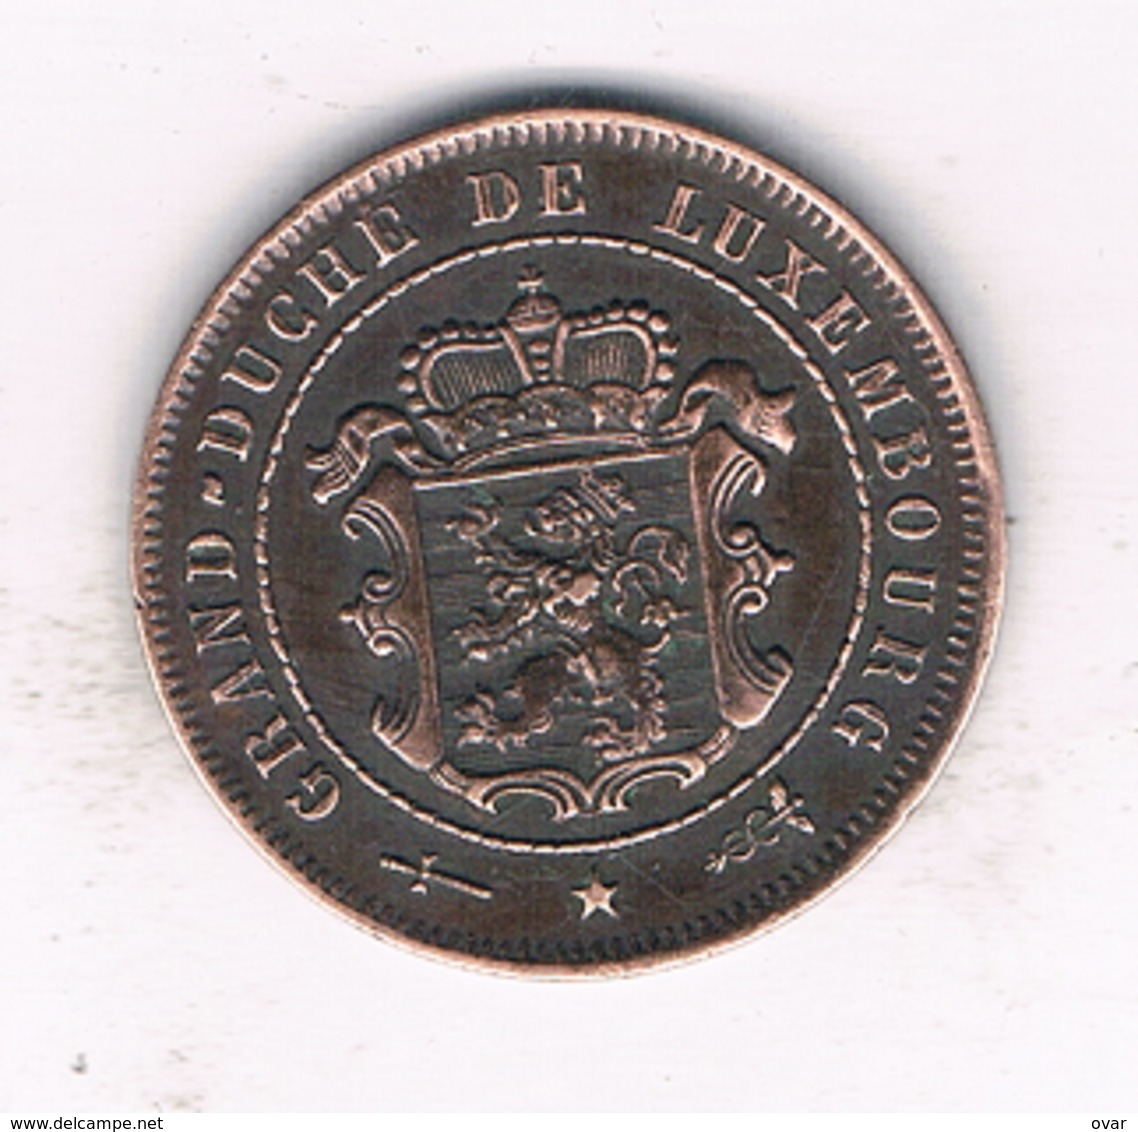 2 1/2 CENTIMES 1901.LUXEMBURG  /970/ - Luxembourg